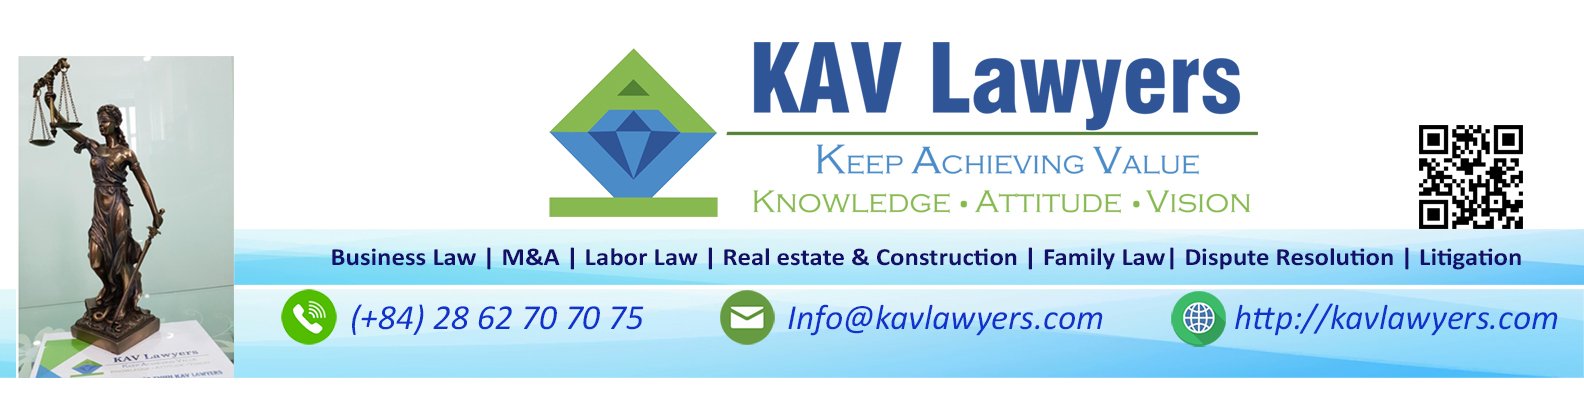 KAV Lawyers cover photo